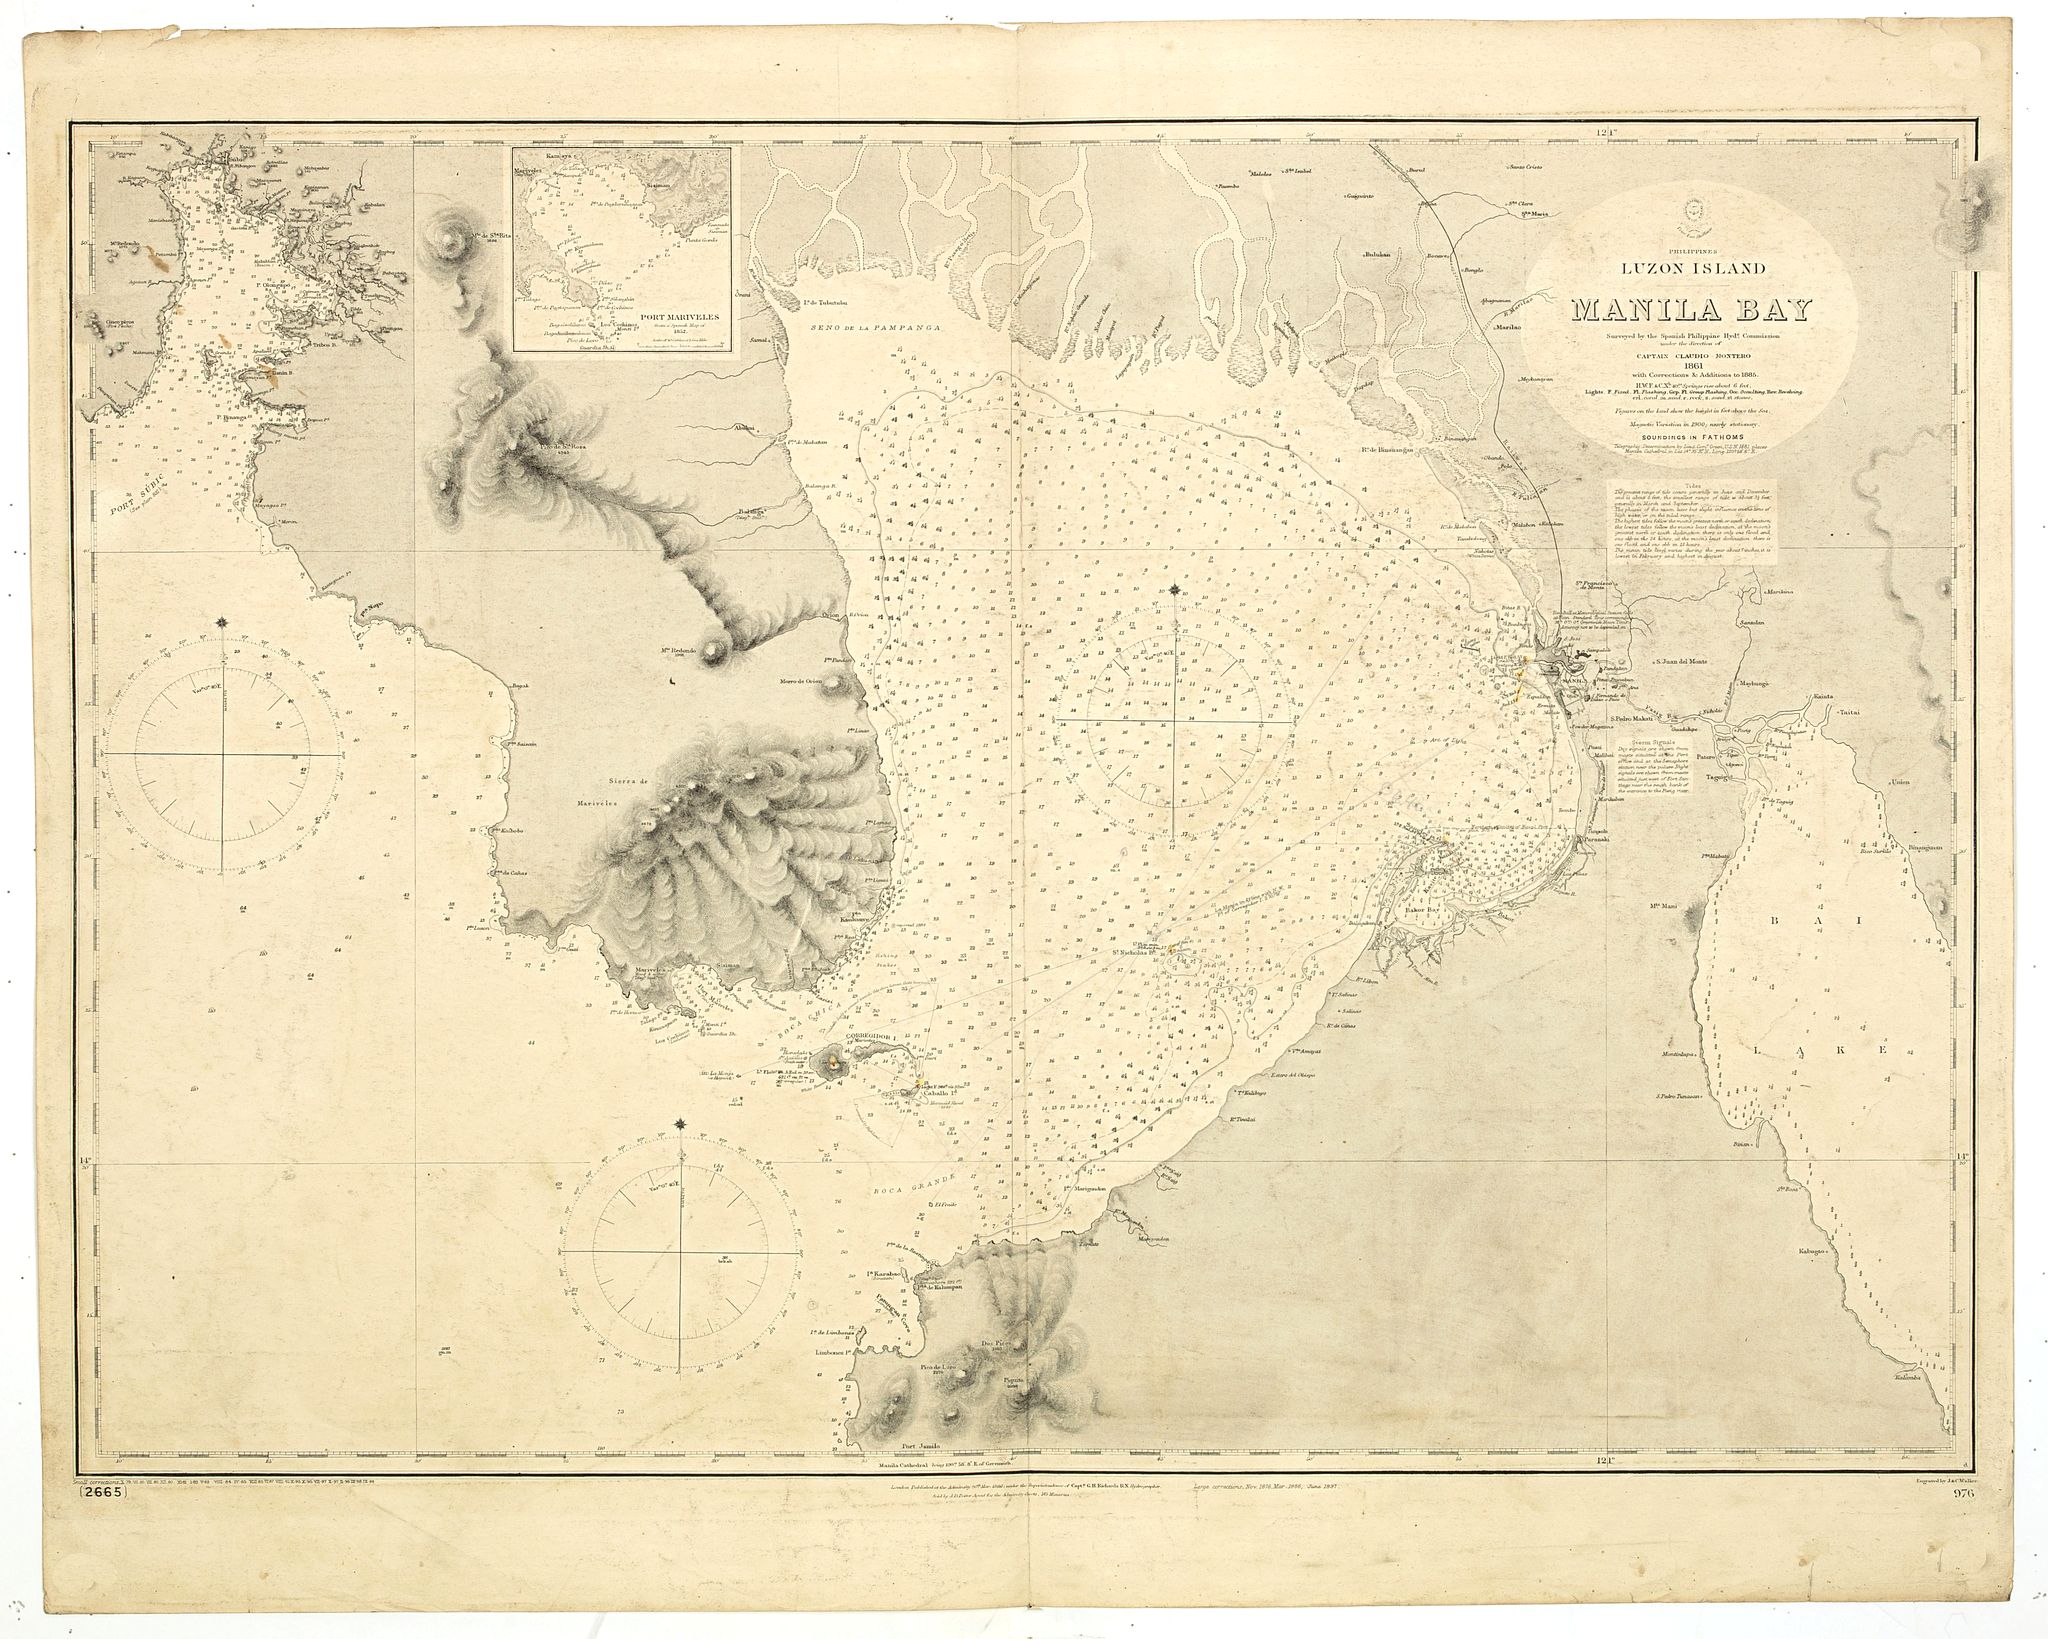 	Philippines. Luzon Island Manila Bay Surveyed by the Spanish Philippine Hyde. Commission under the direction of Captain Claudio Montero 1861